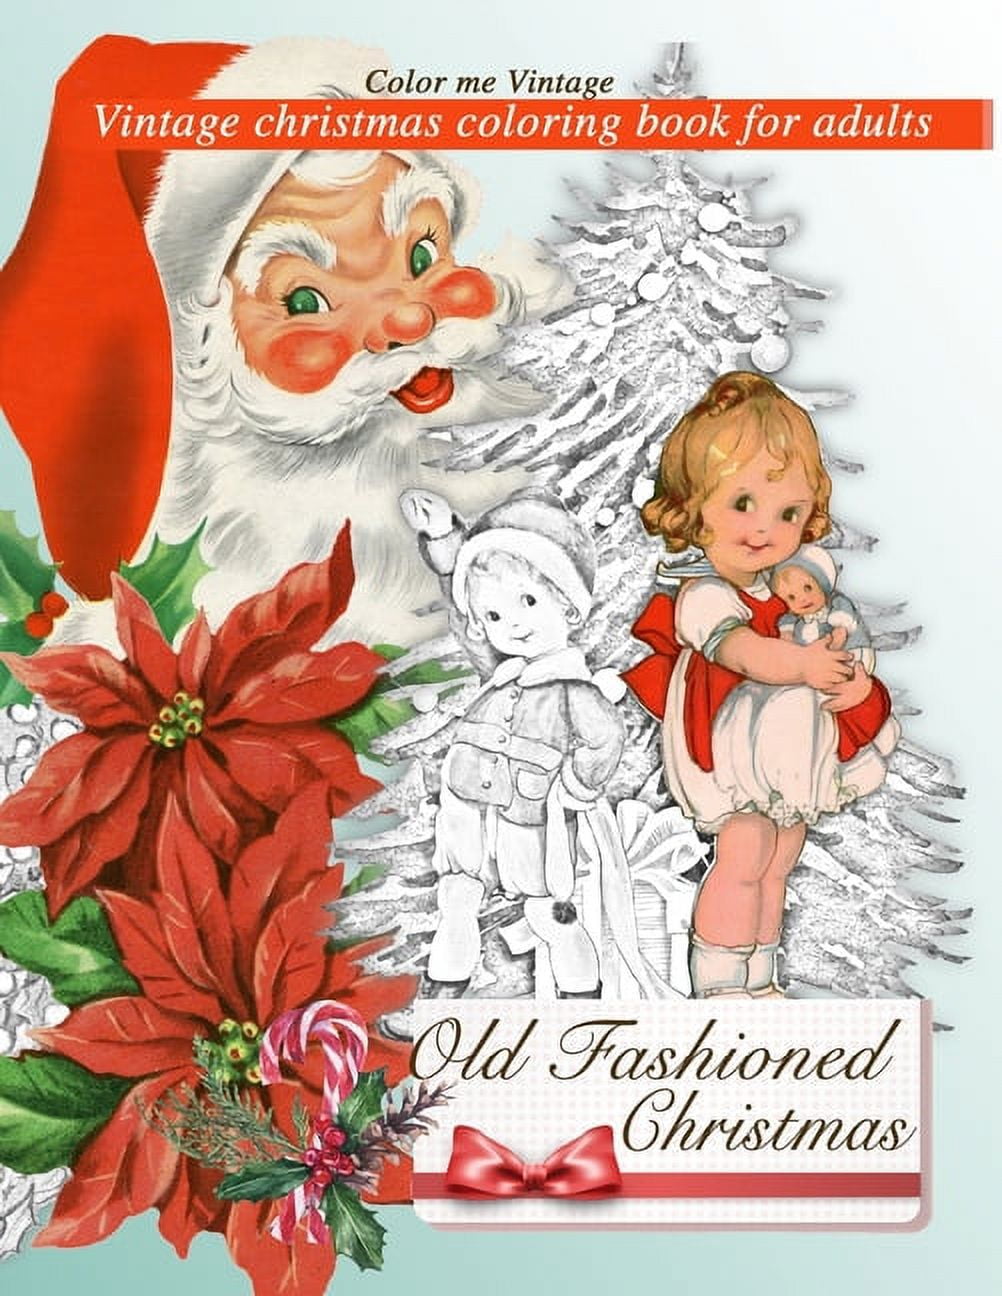 Retro old fashioned christmas vintage coloring book for adults paperback